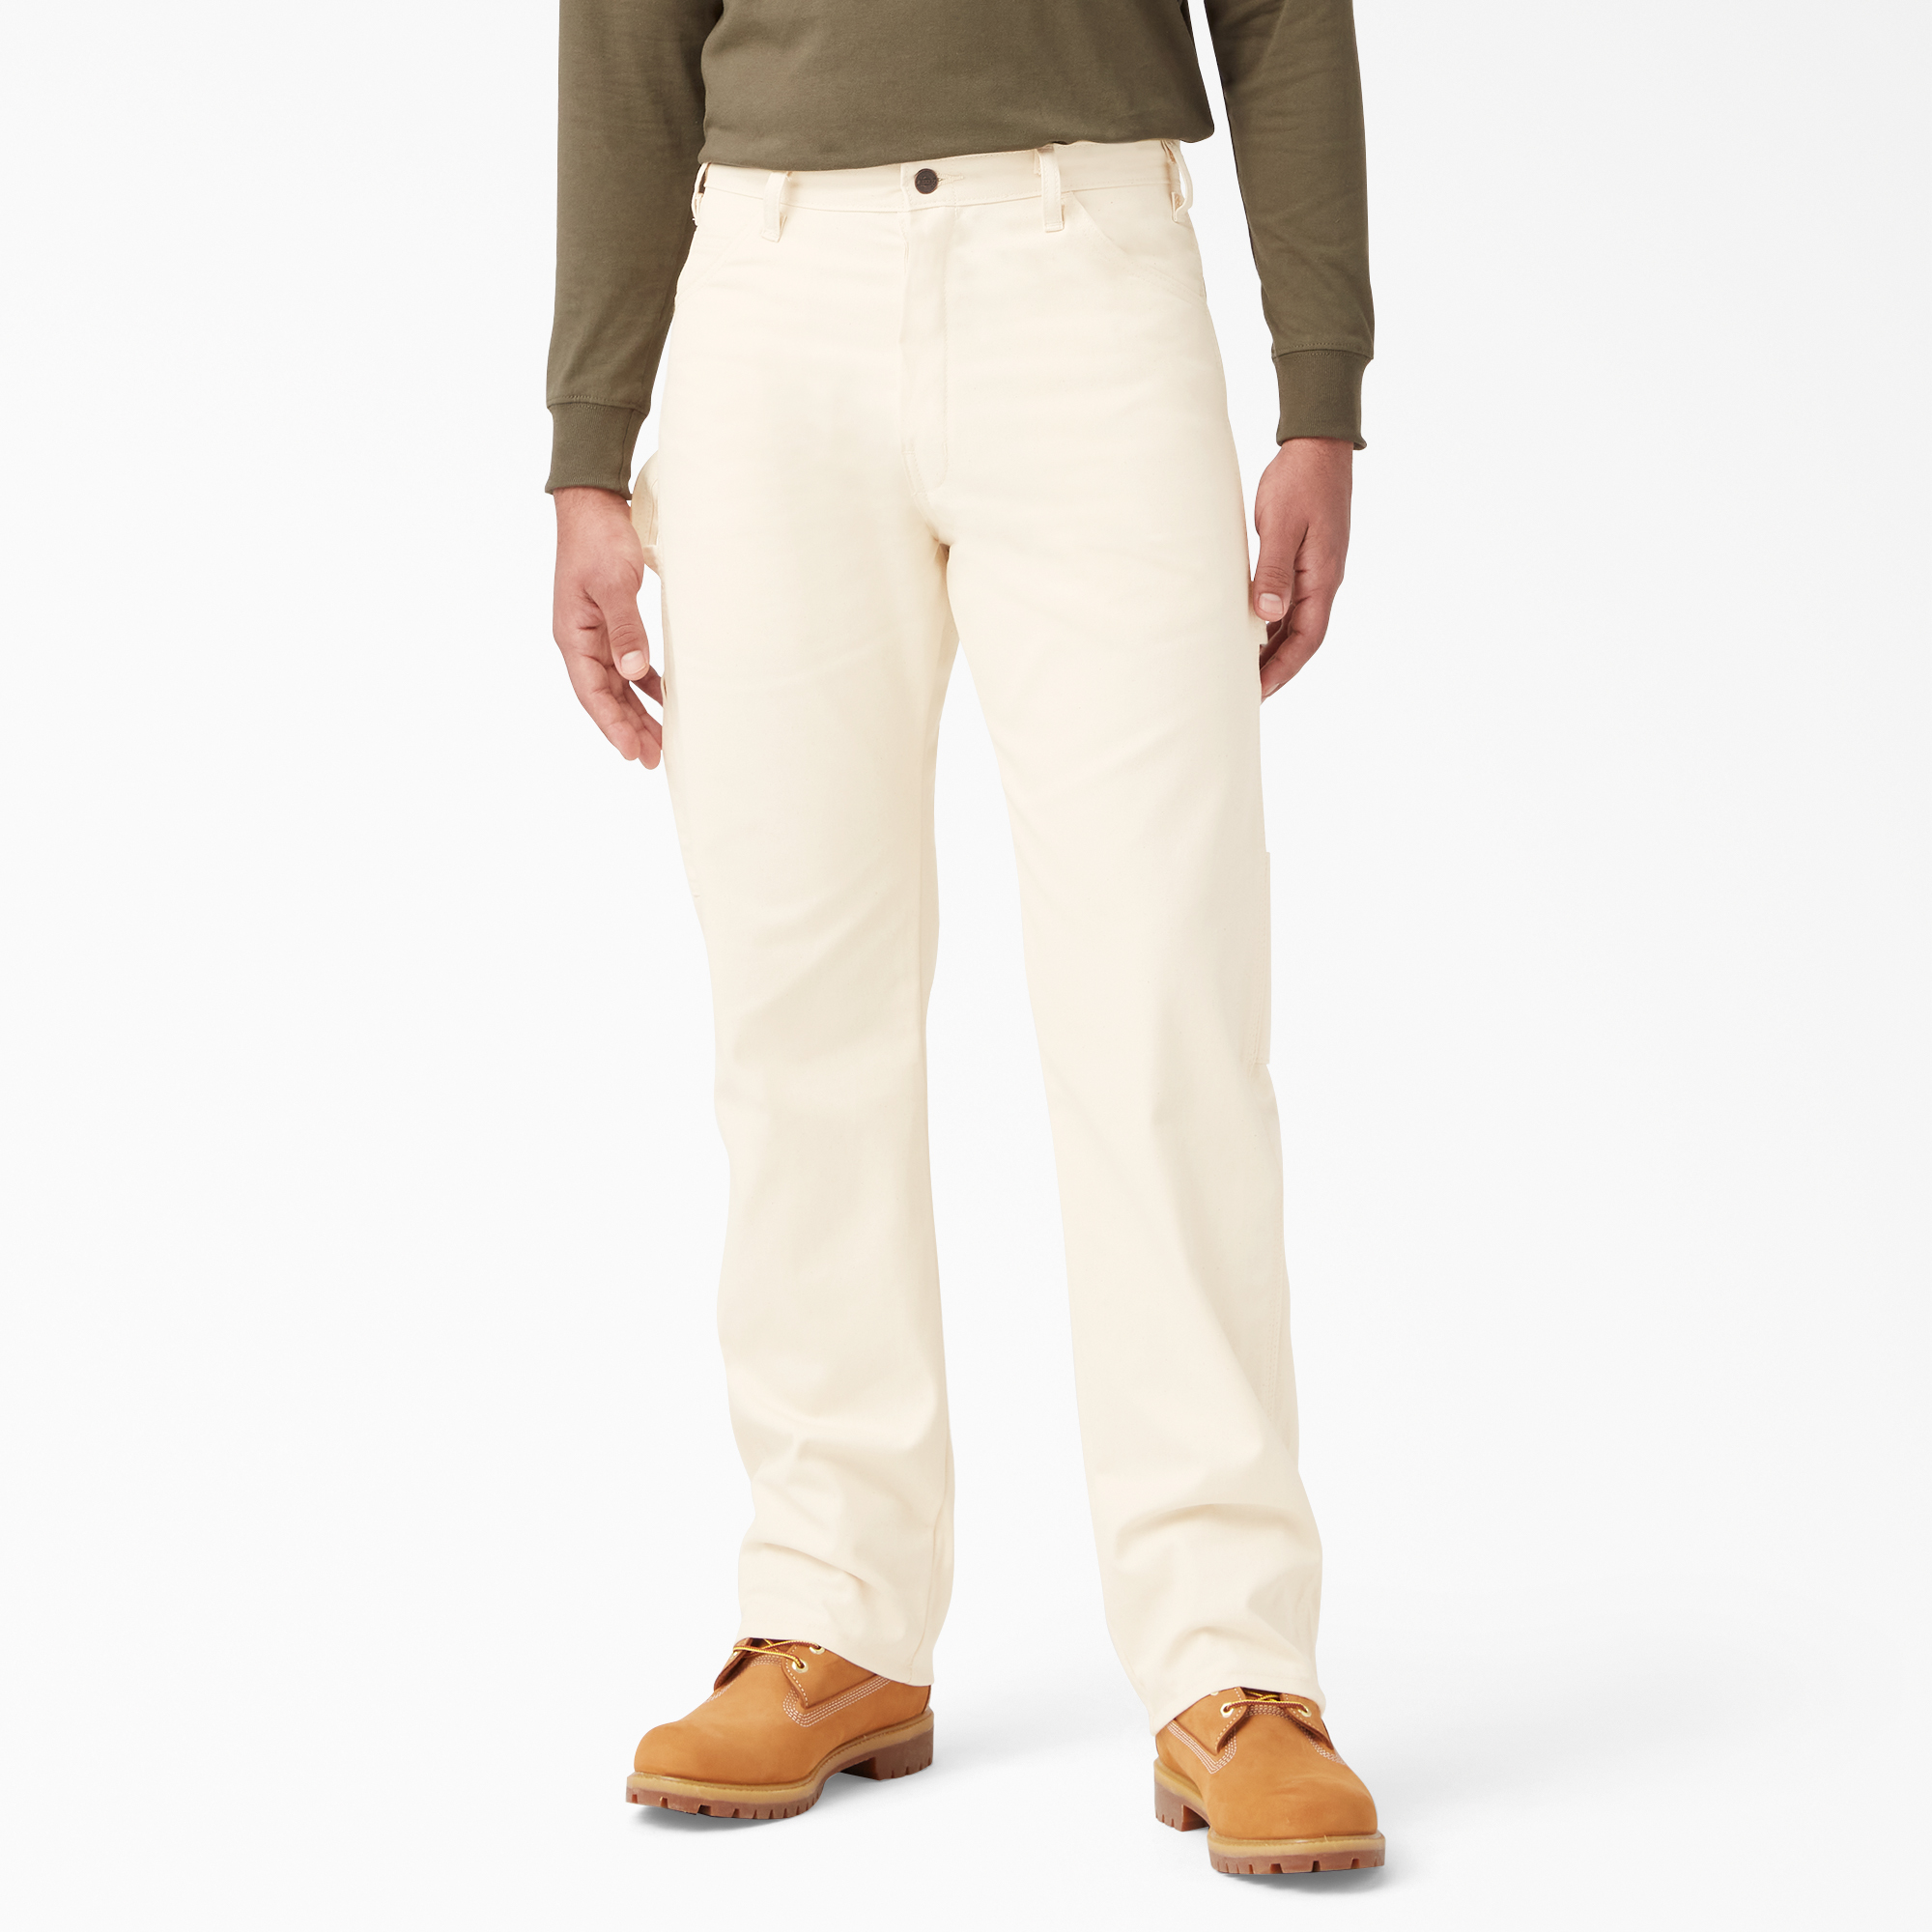 Relaxed Fit Straight Leg Cotton Painter's Pants - Natural Beige (NT)